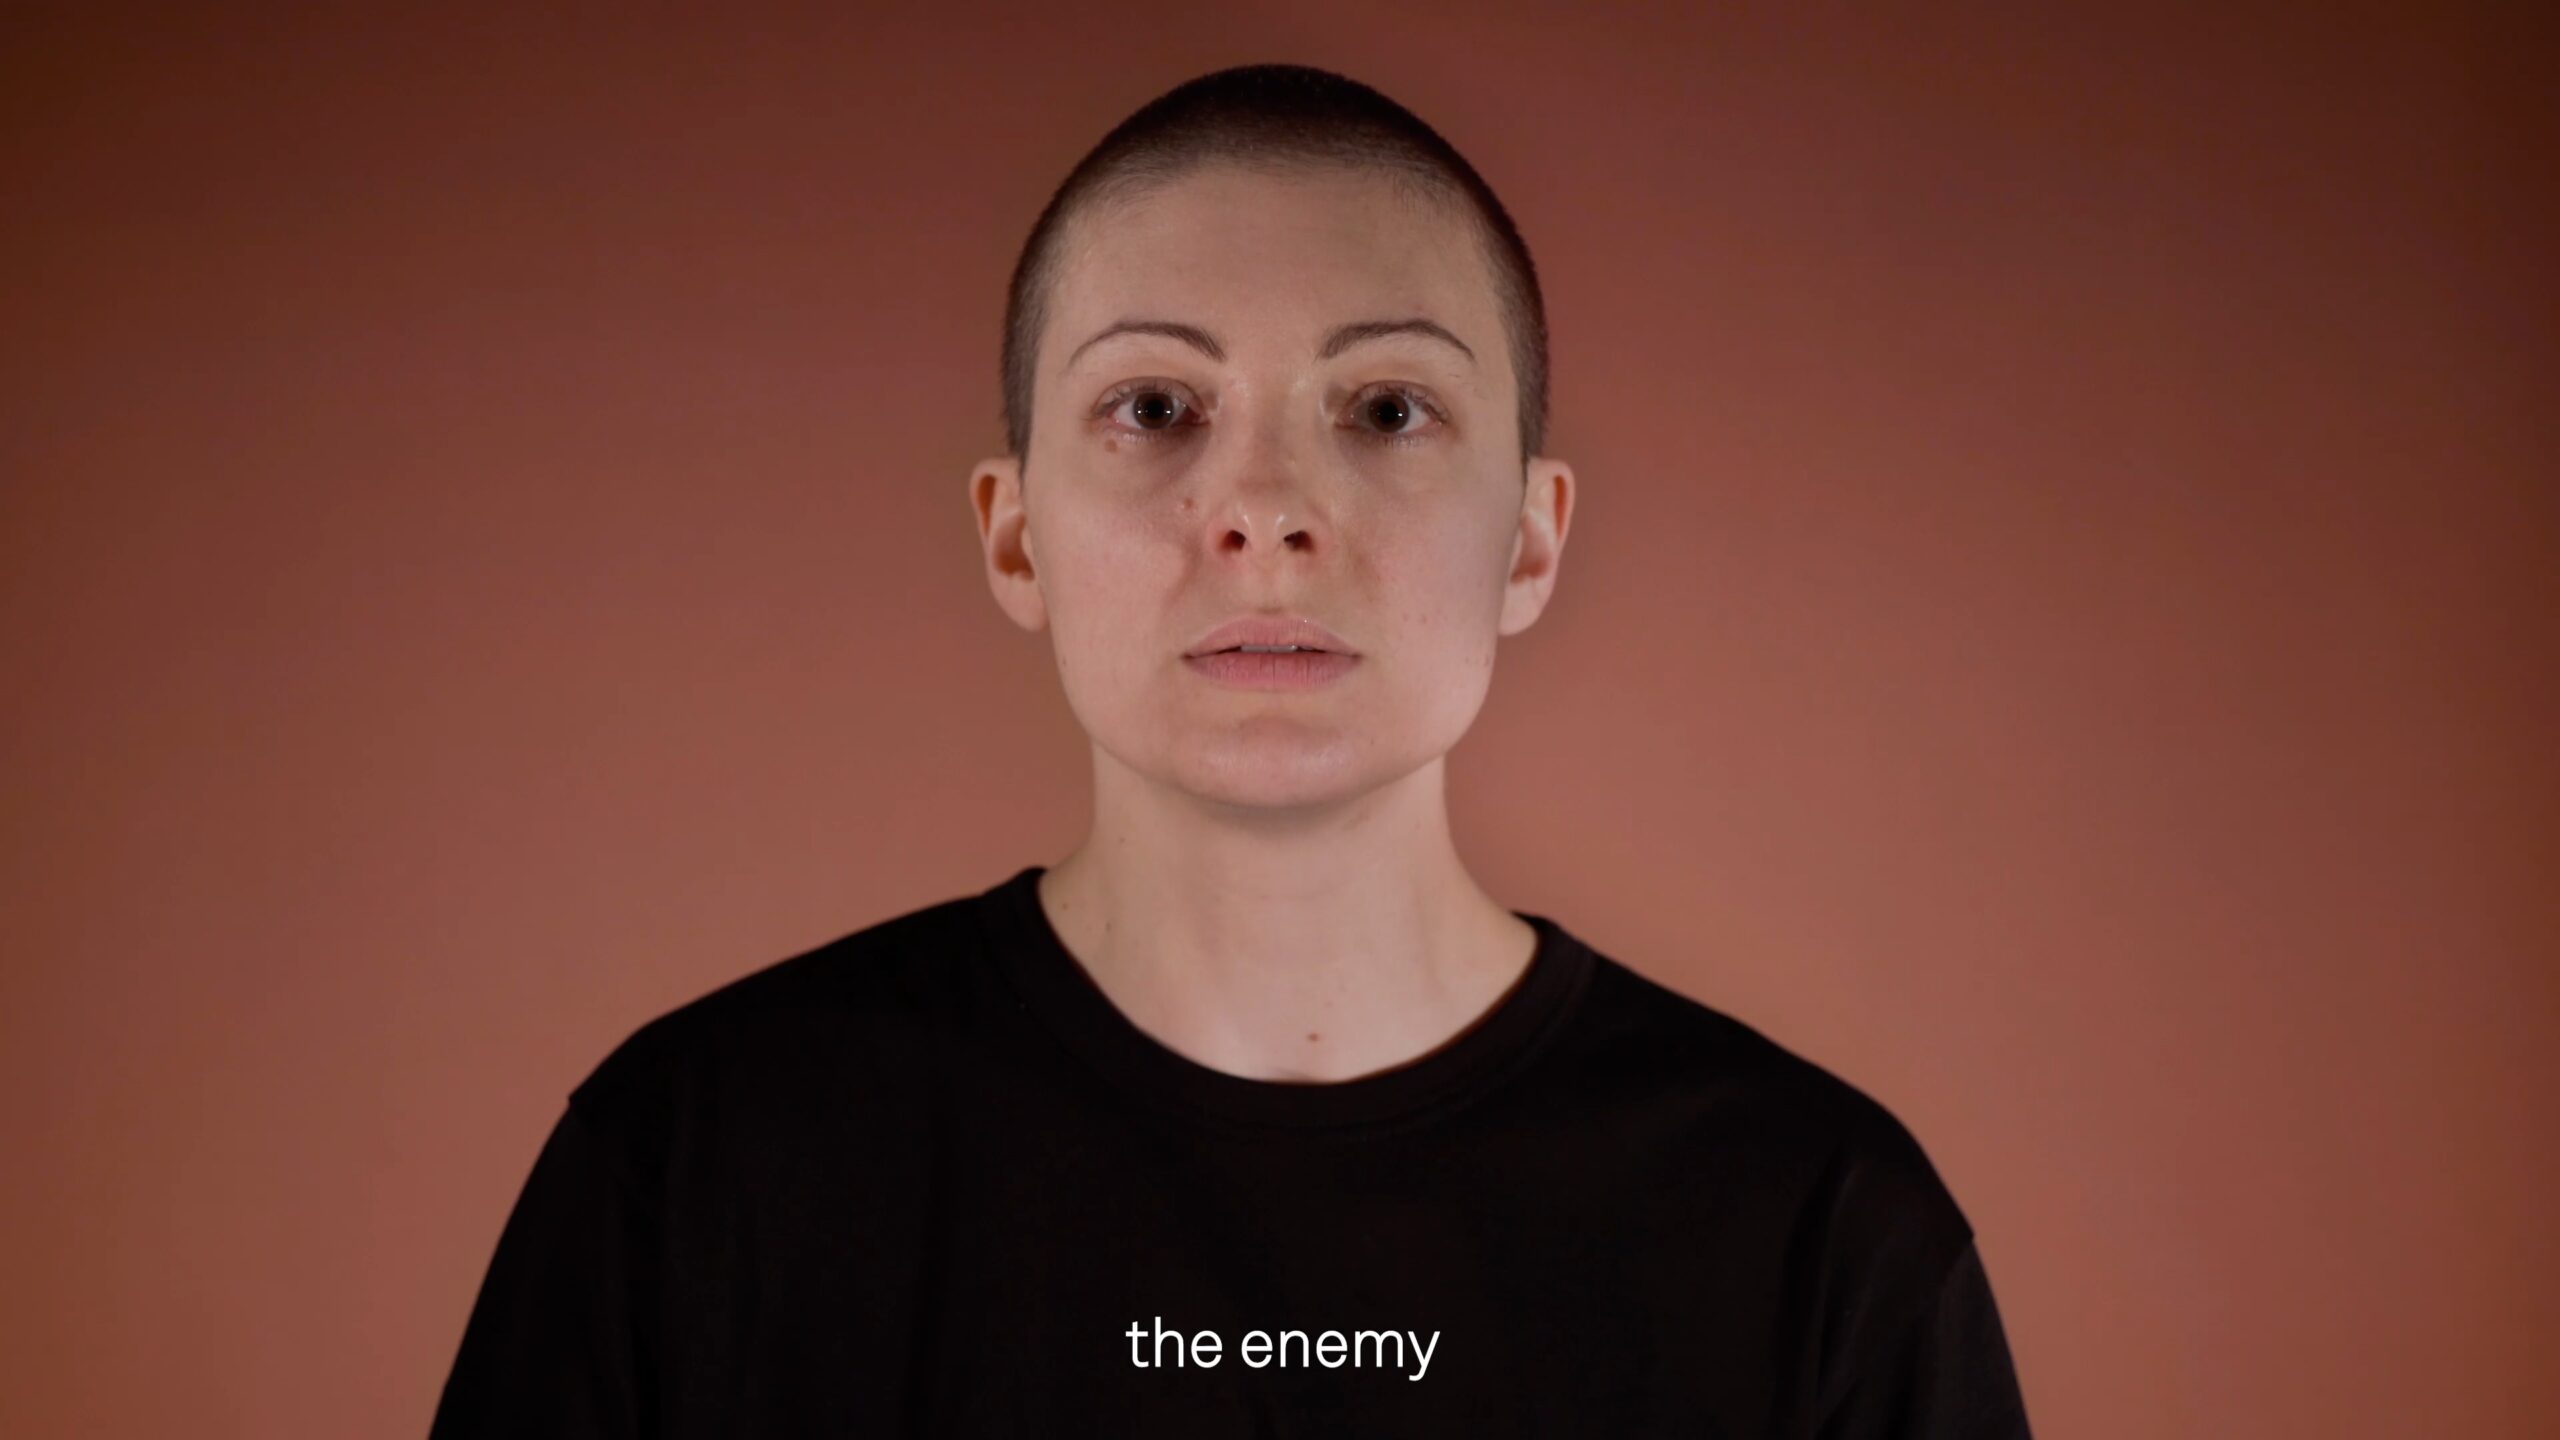 Video still of a person with a shaved head